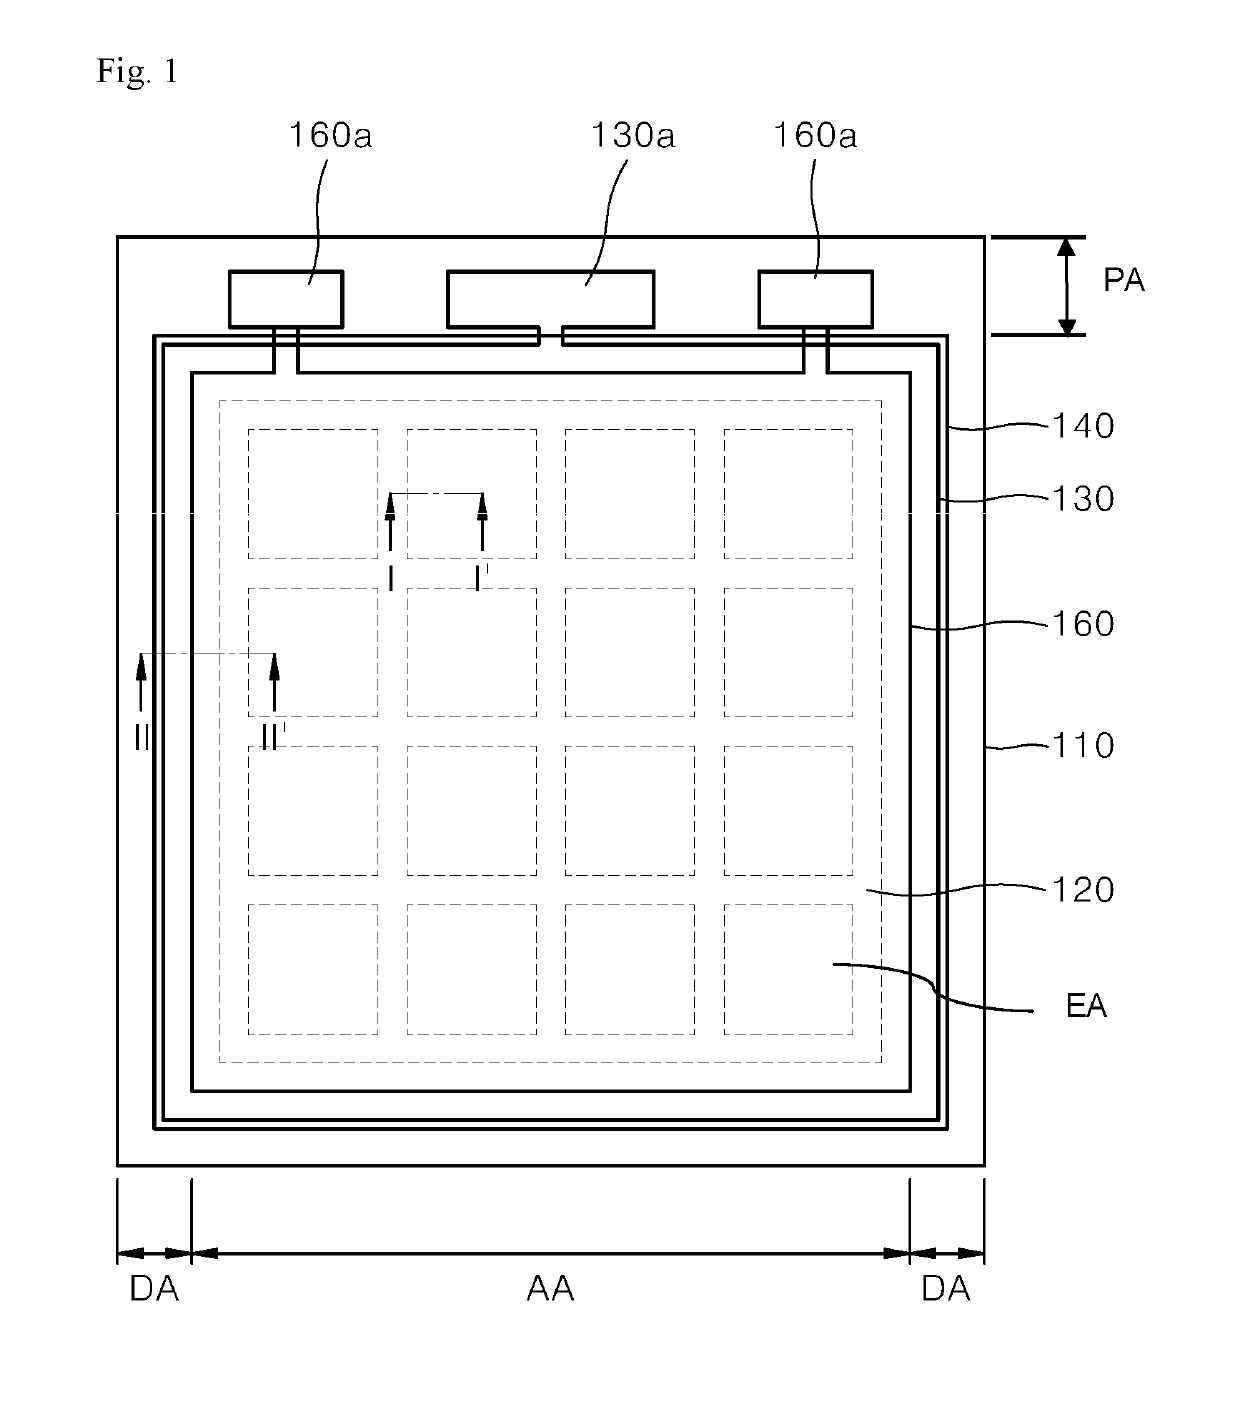 OLED panel for lighting device